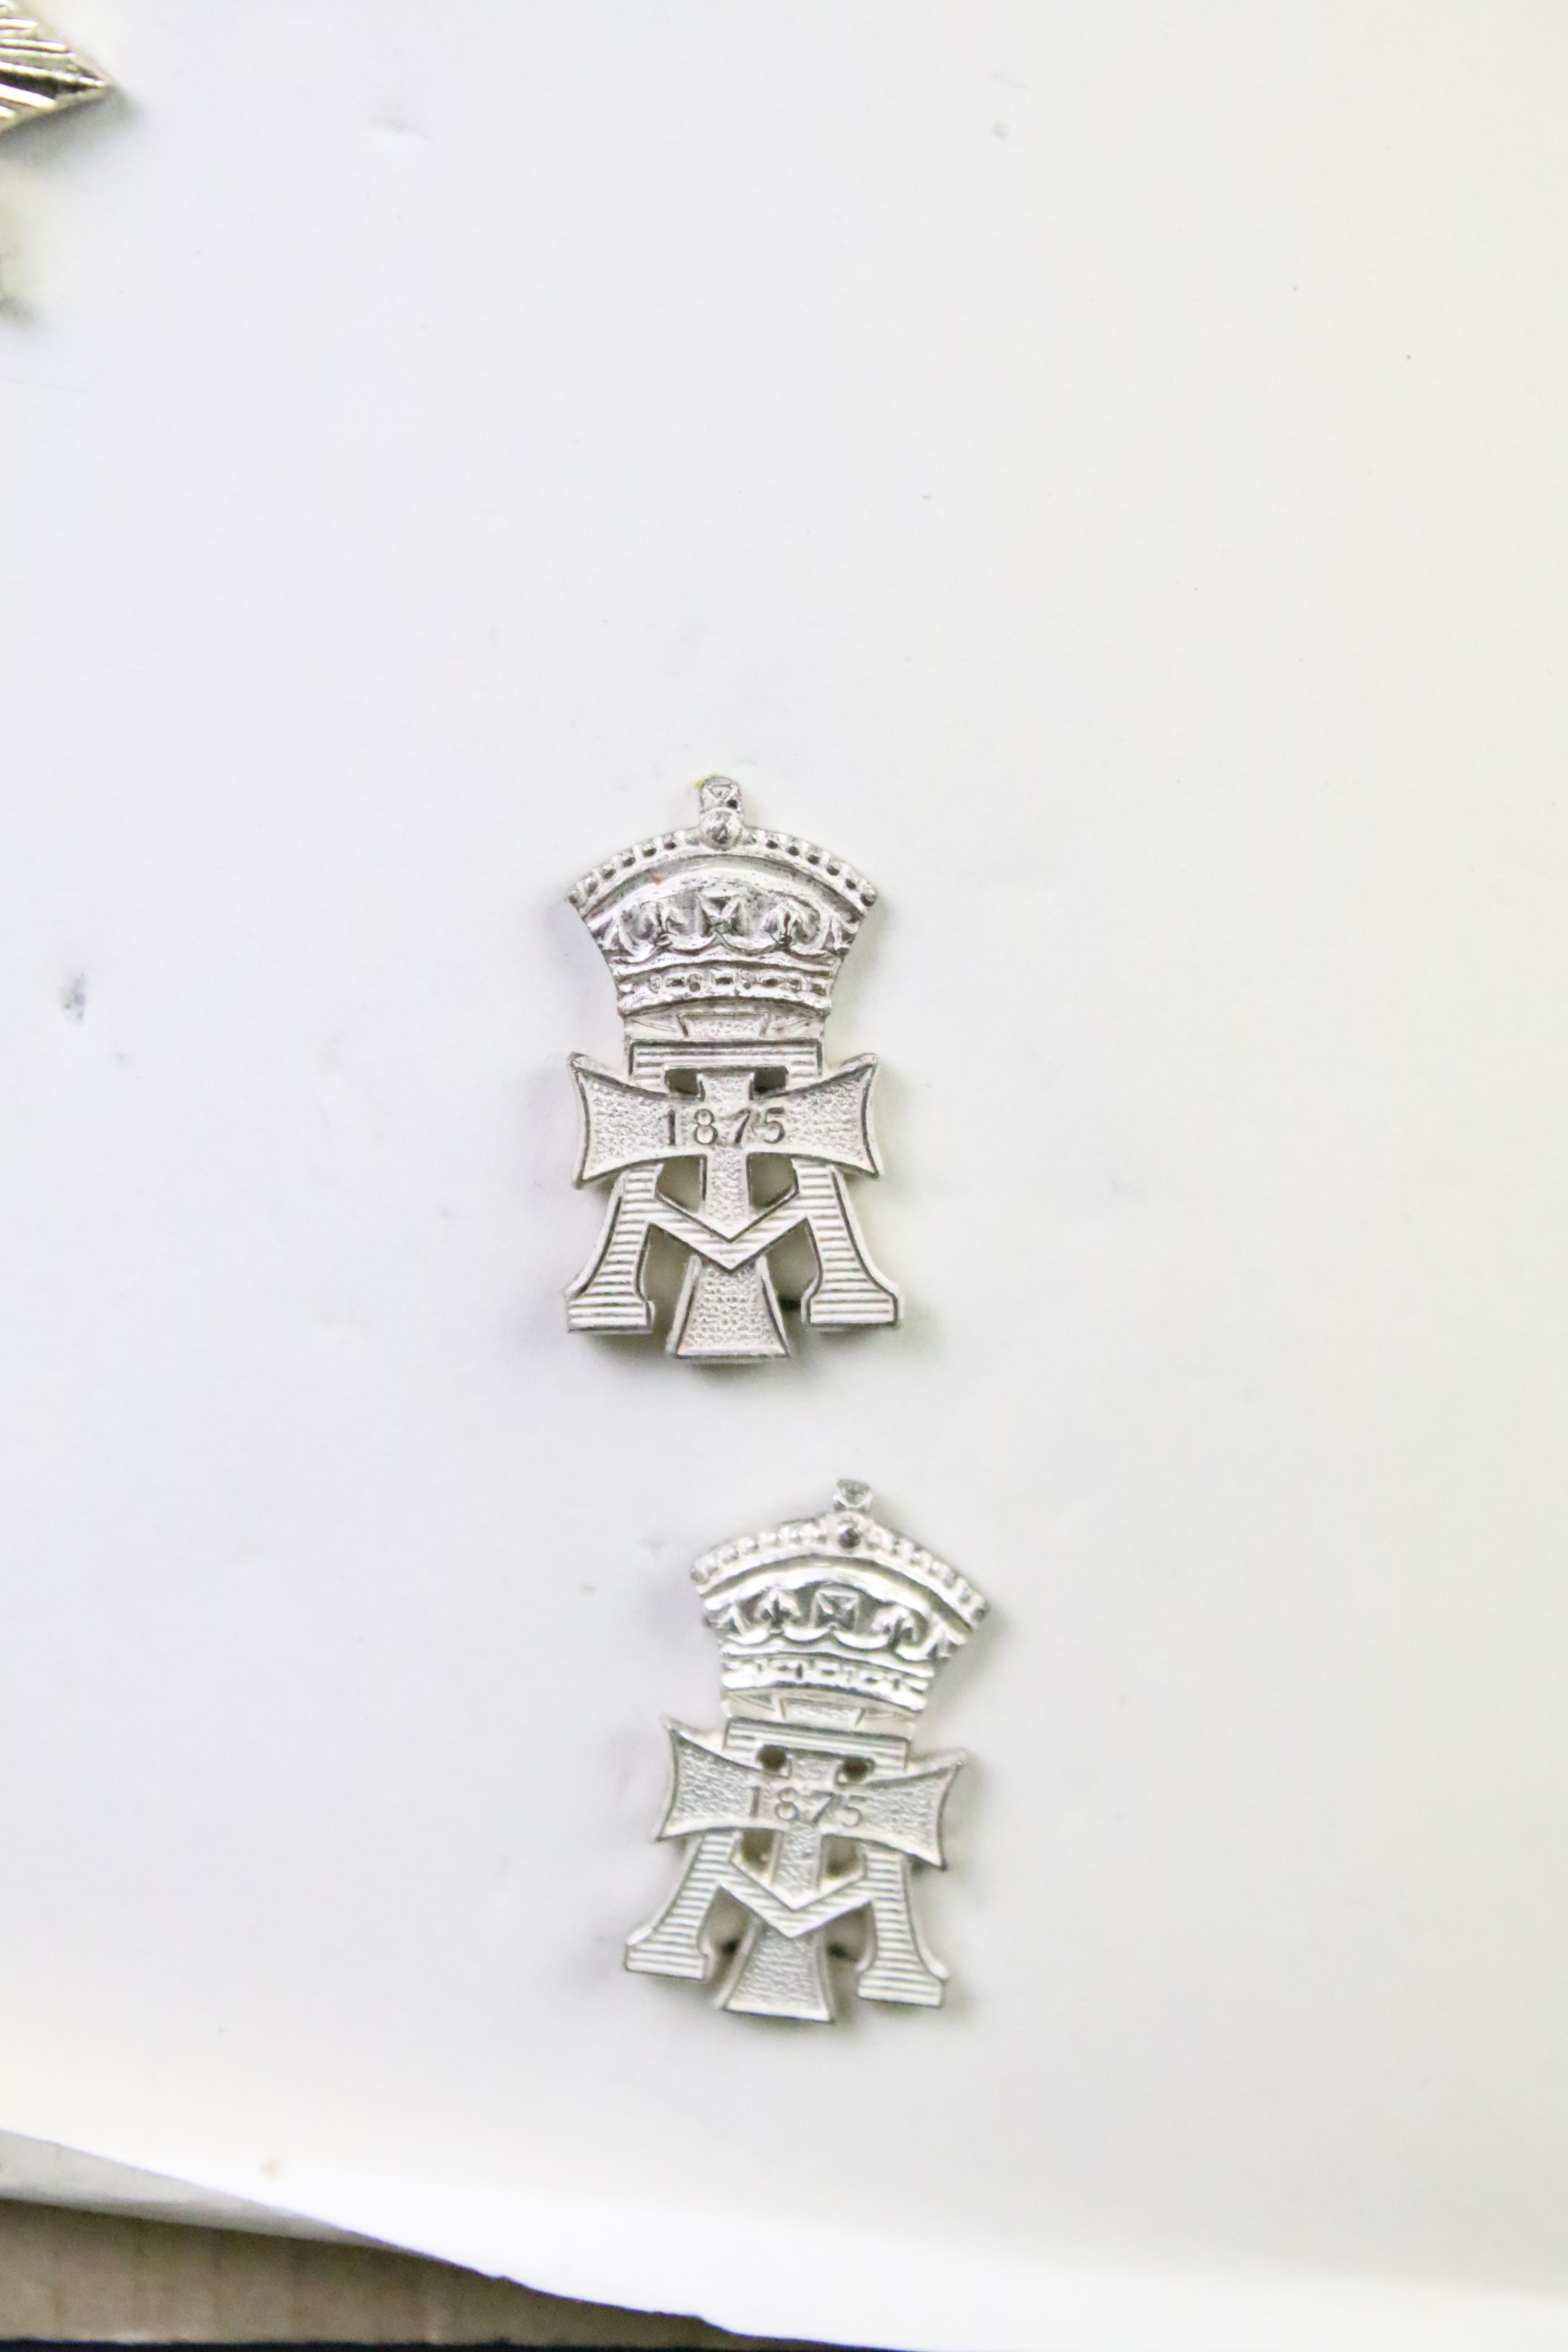 A collection of British military Regimental cap and collar badges to include the Yorkshire Regiment, - Image 9 of 13